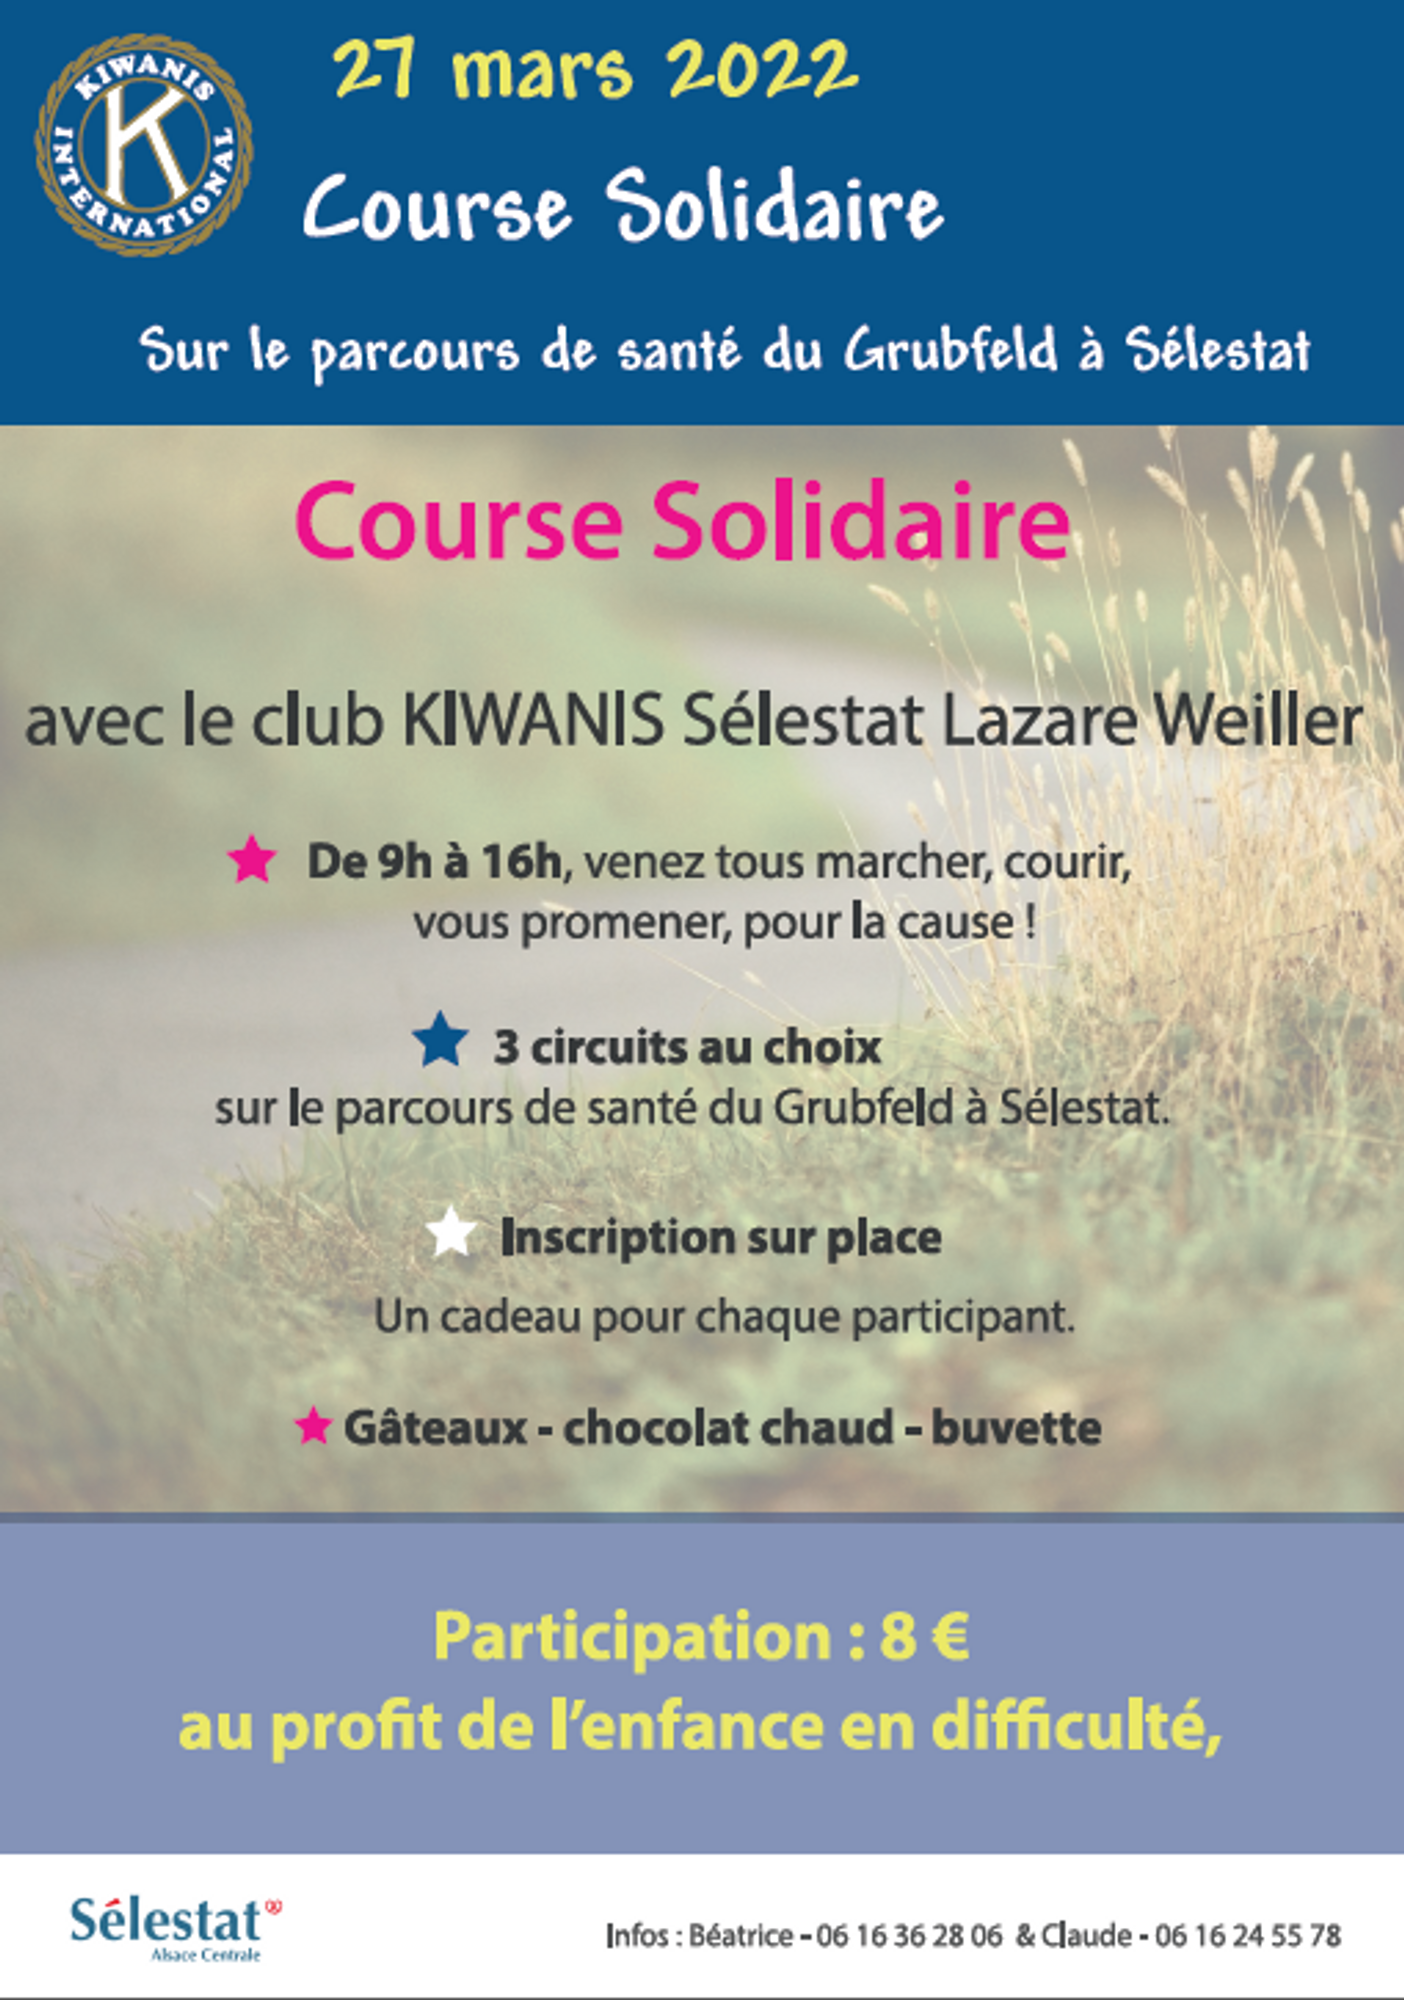 course solidaire kiwanis